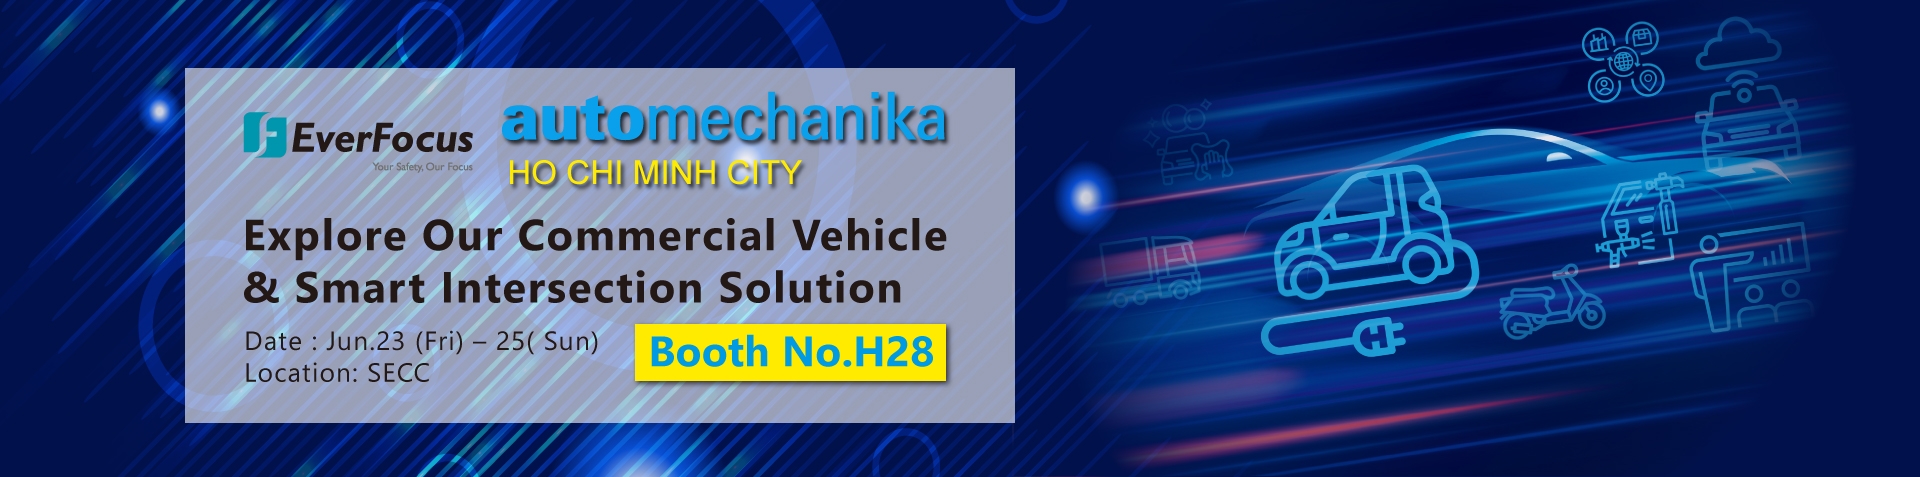 EverFocus will participate in the Automechanika -Ho chi Minh City, showcasing the latest commercial vehicle and intelligent intersection solutions.